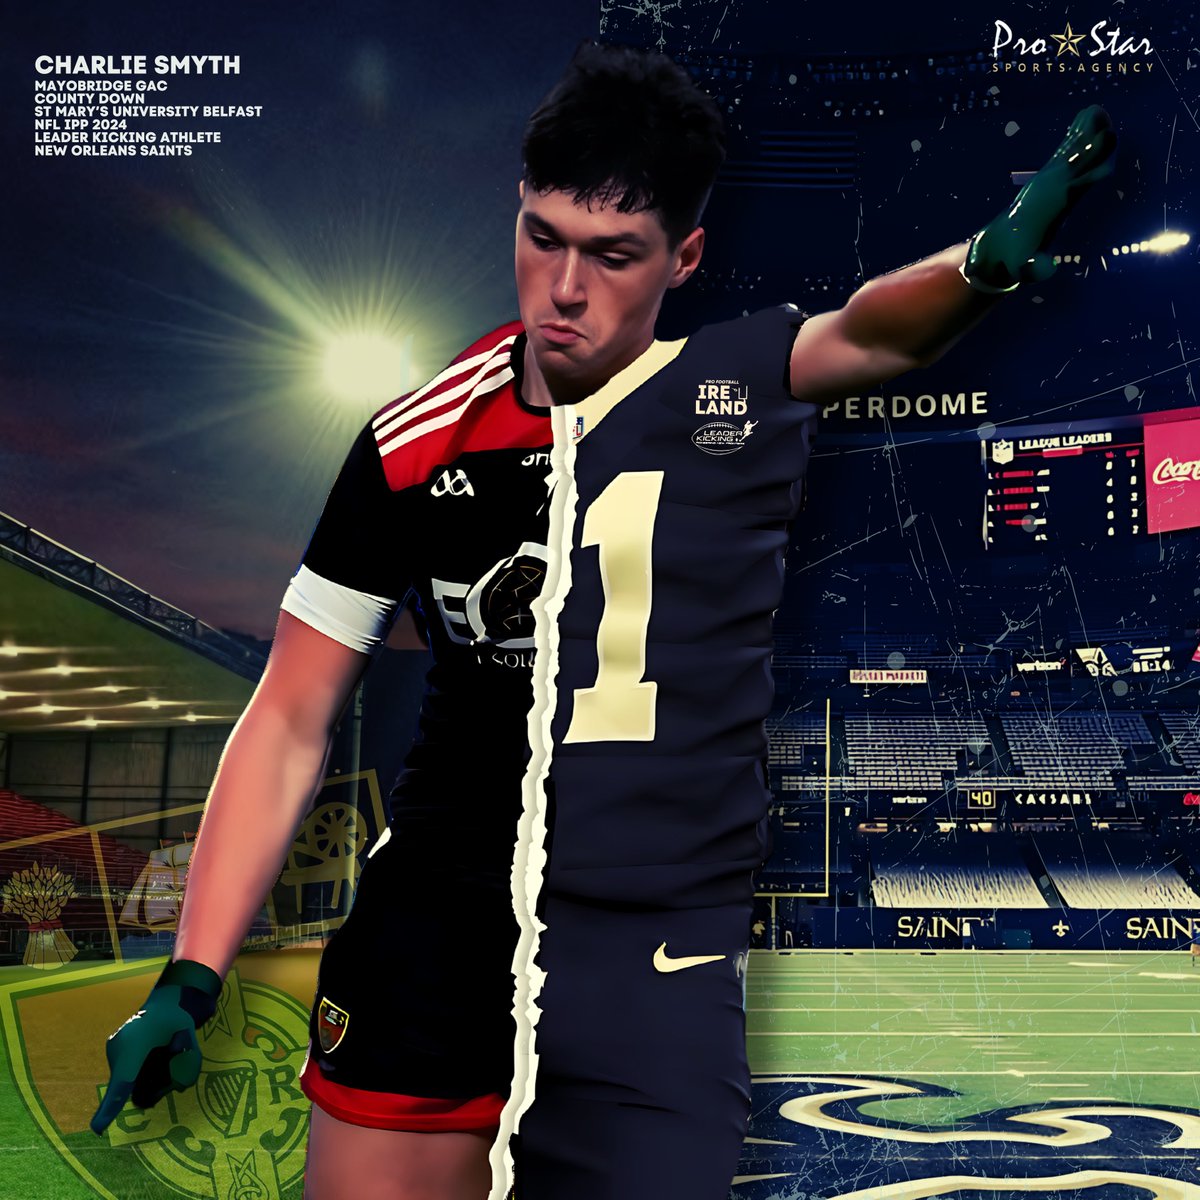 Saint Smyth: County Down NFL IPP athlete Charlie Smyth has signed with the New Orleans Saints, per source. Congratulations to all at Leader Kicking - @TadhgLeader, @DropkickMangan - life changing opportunities & @ProStarSports team!